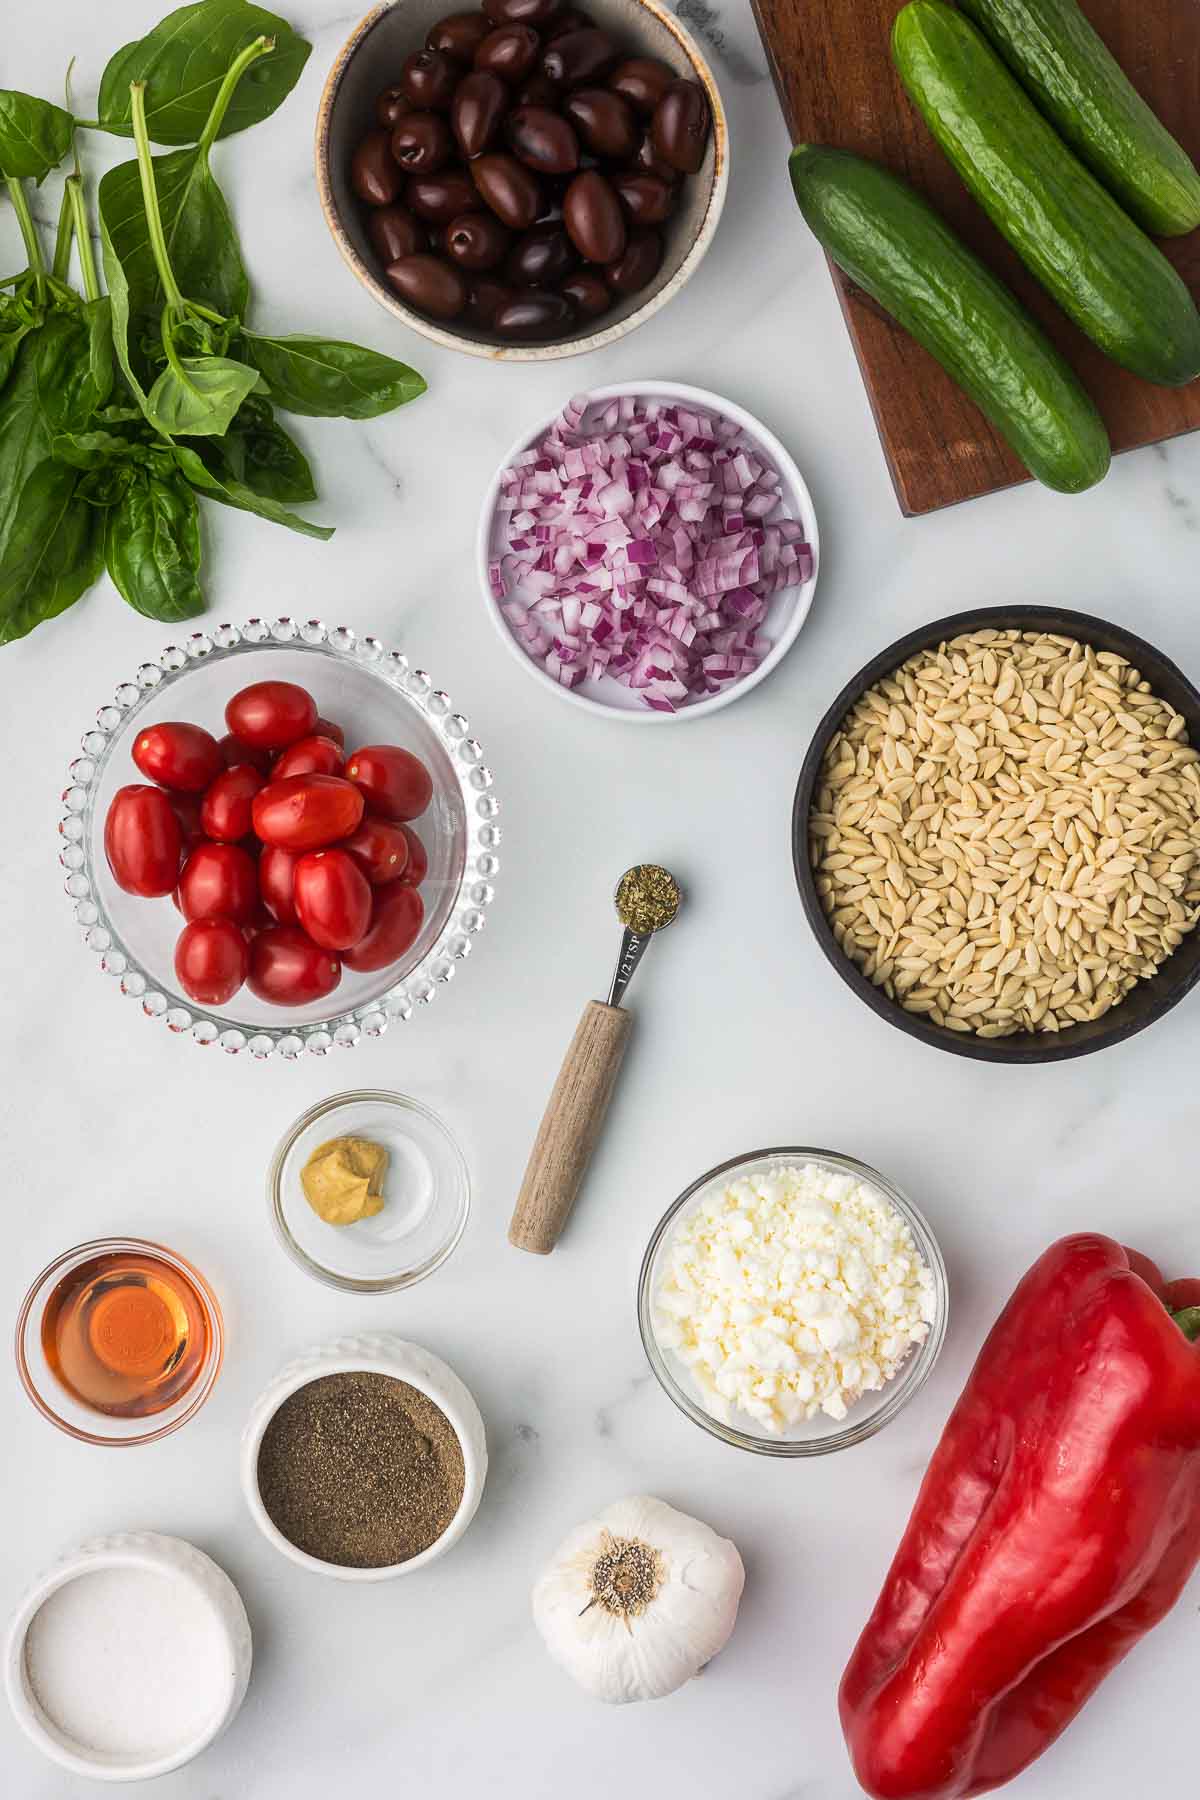 Ingredients for greek pasta salad with orzo.